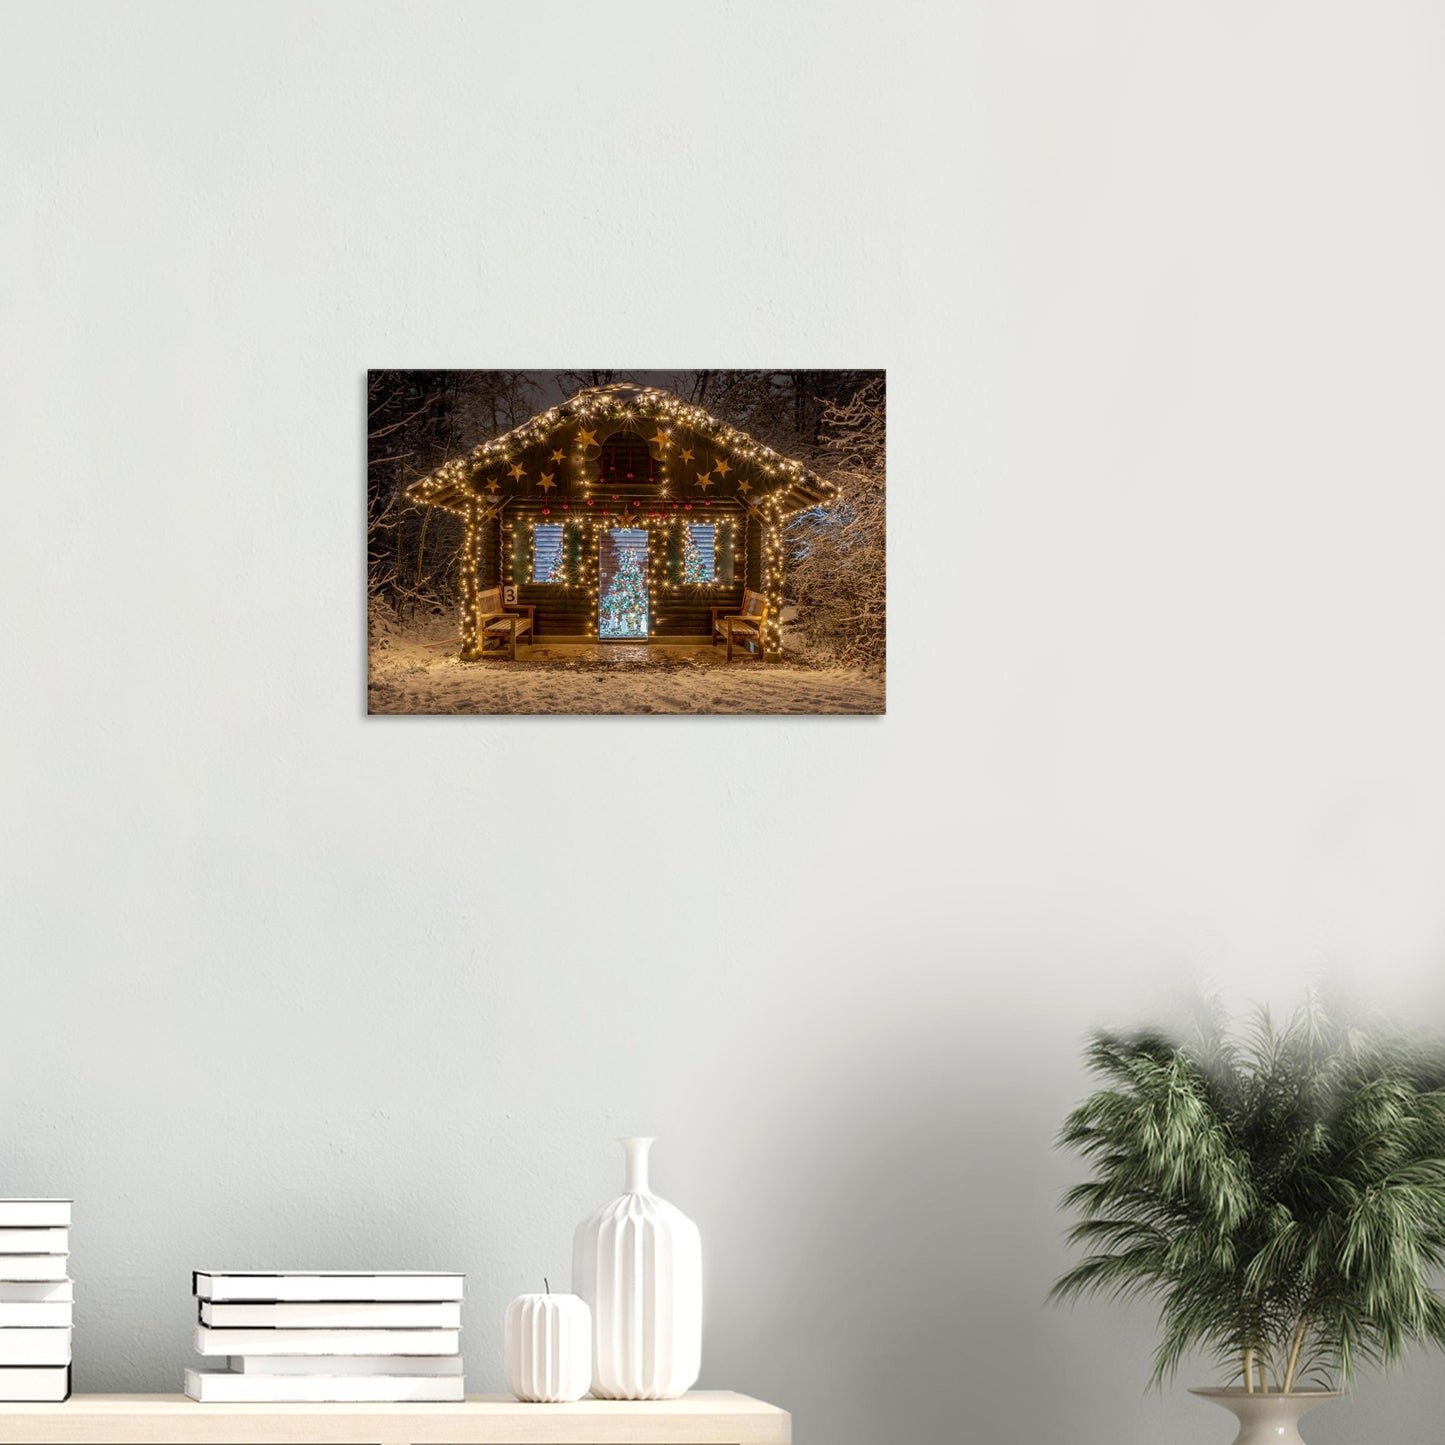 Dreamy little house in Advent on canvas 